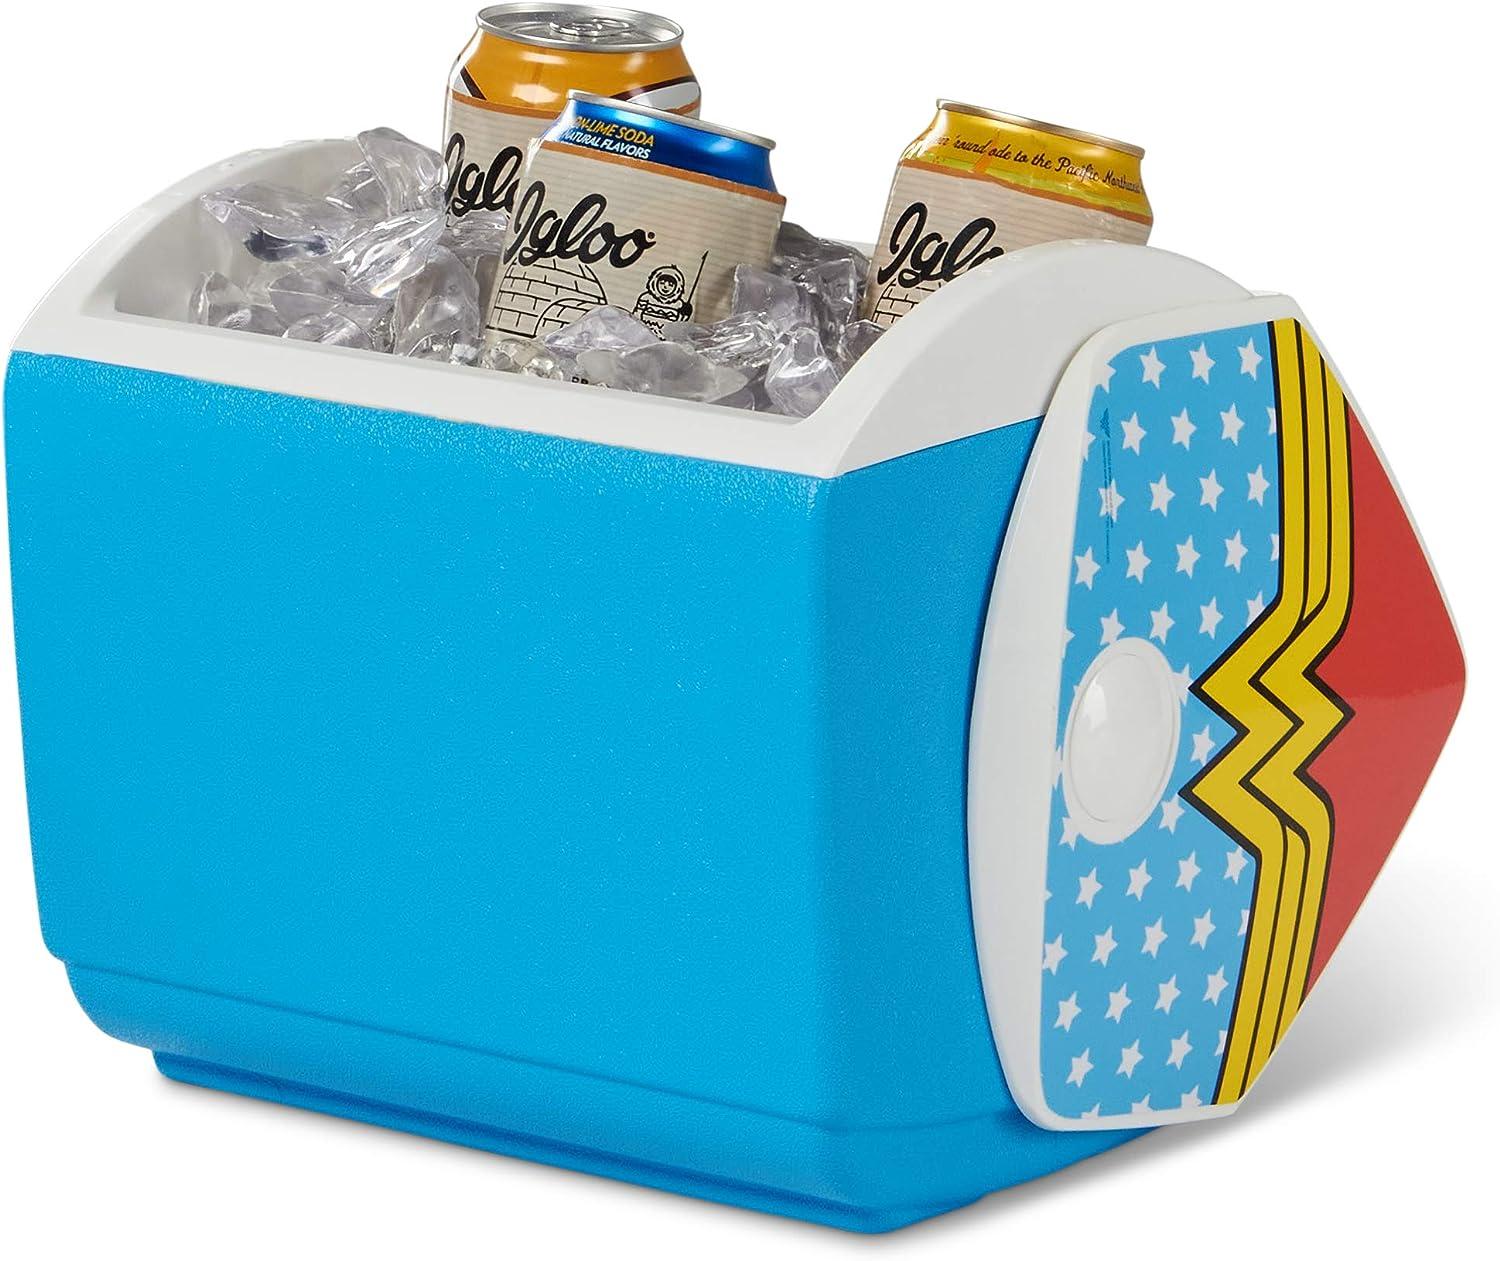 Igloo Limited Edition 7 Qt Comic Superhero's Decorated Playmate Lunch Box  Cooler Wonder Woman